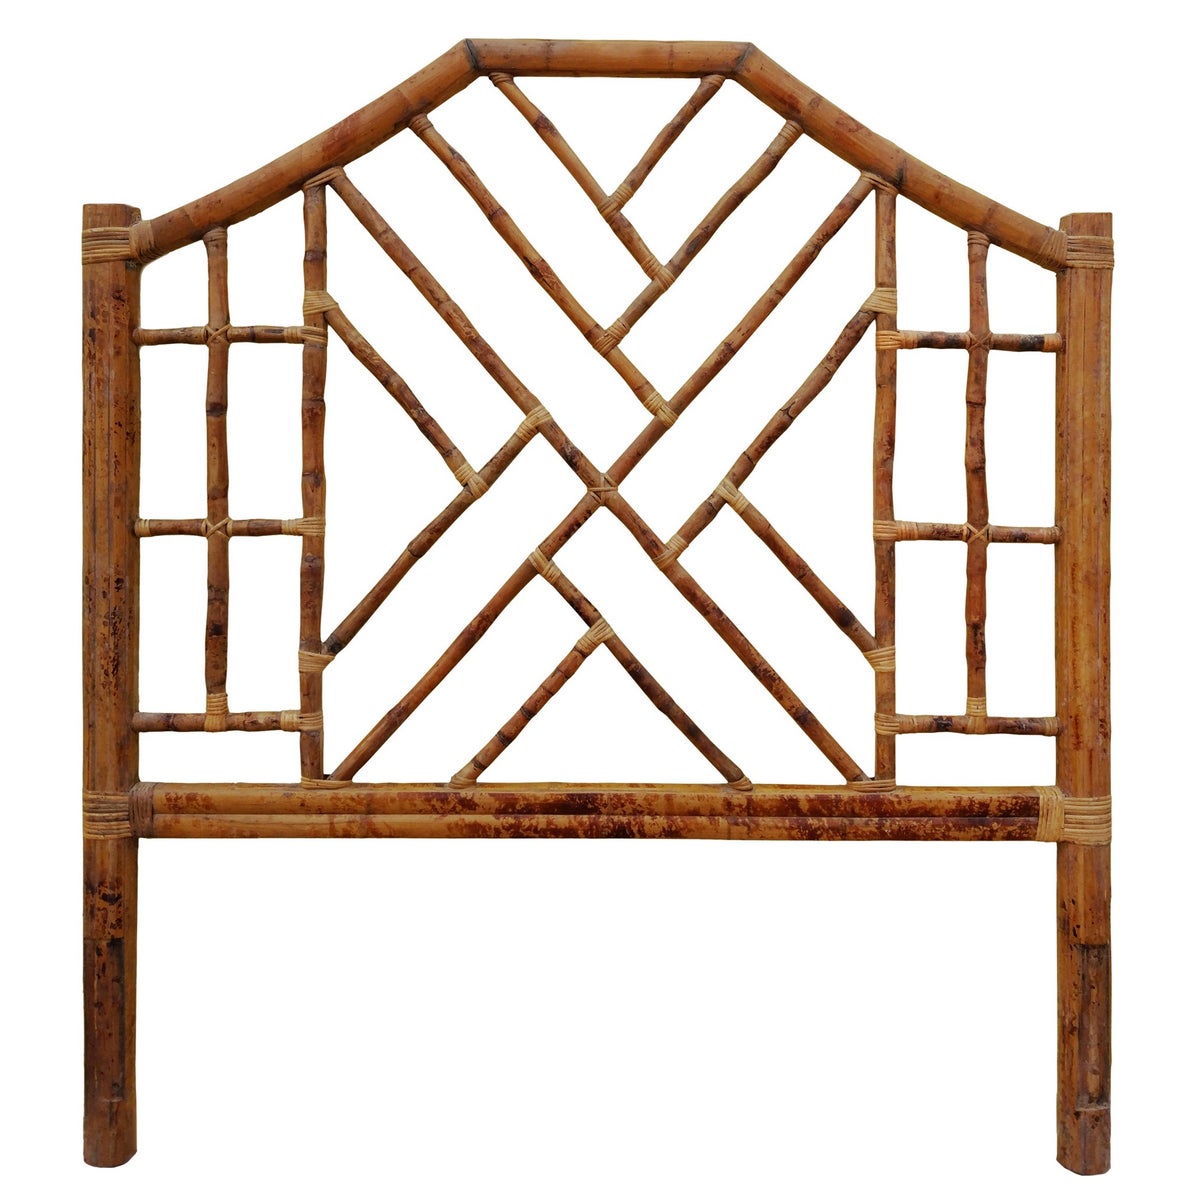 Chinese Chippendale Headboard Queen Color - Antique Tortoise NOTE:  Kenian headboards are not  pr